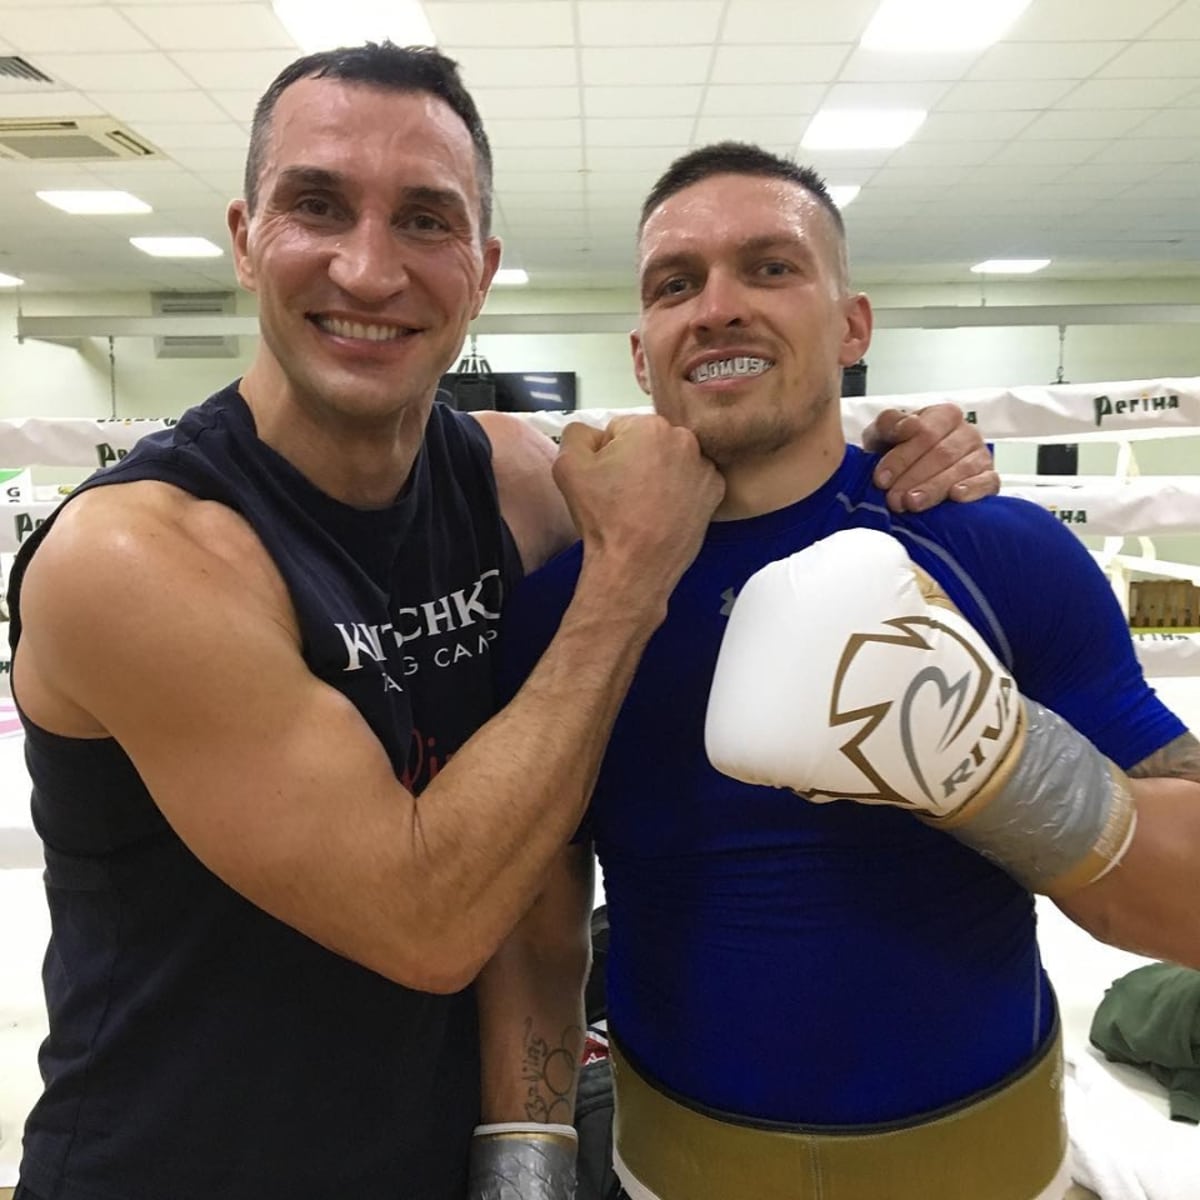 Image: New Usyk Interview: "Some of My Friends Are Missing. Where Are They?"